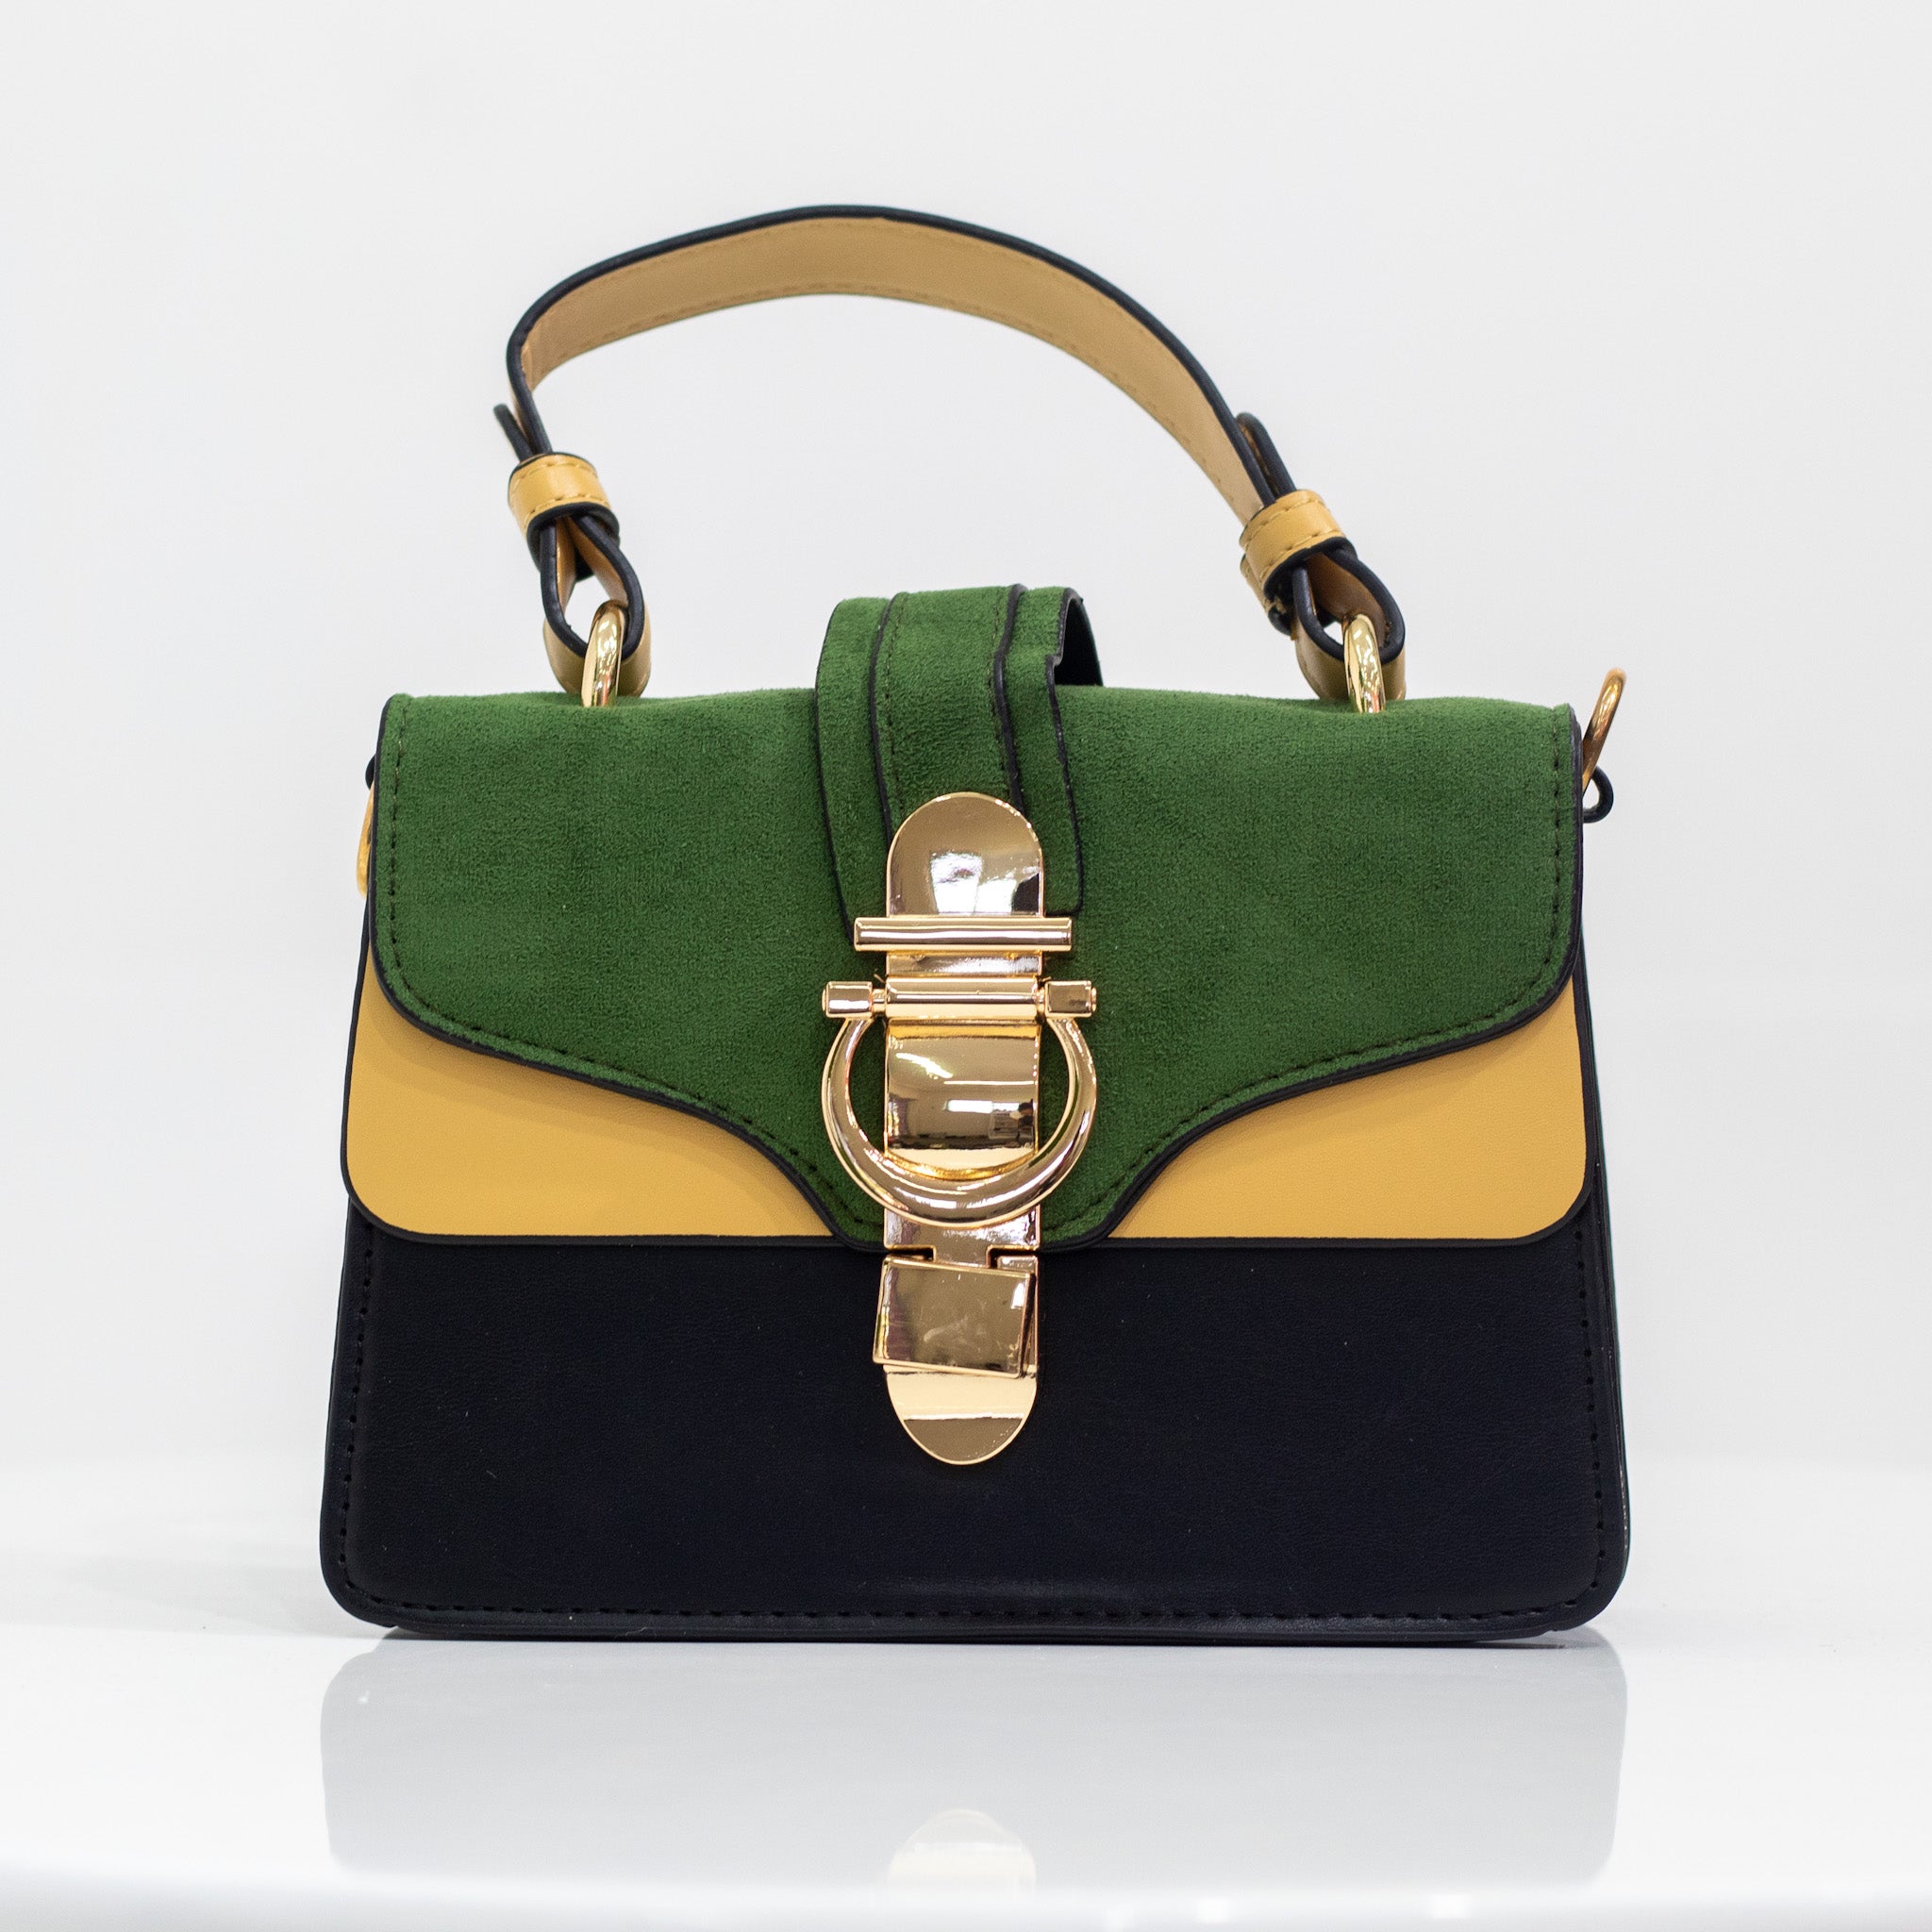 Green multi-color faux leather hand bag yasti